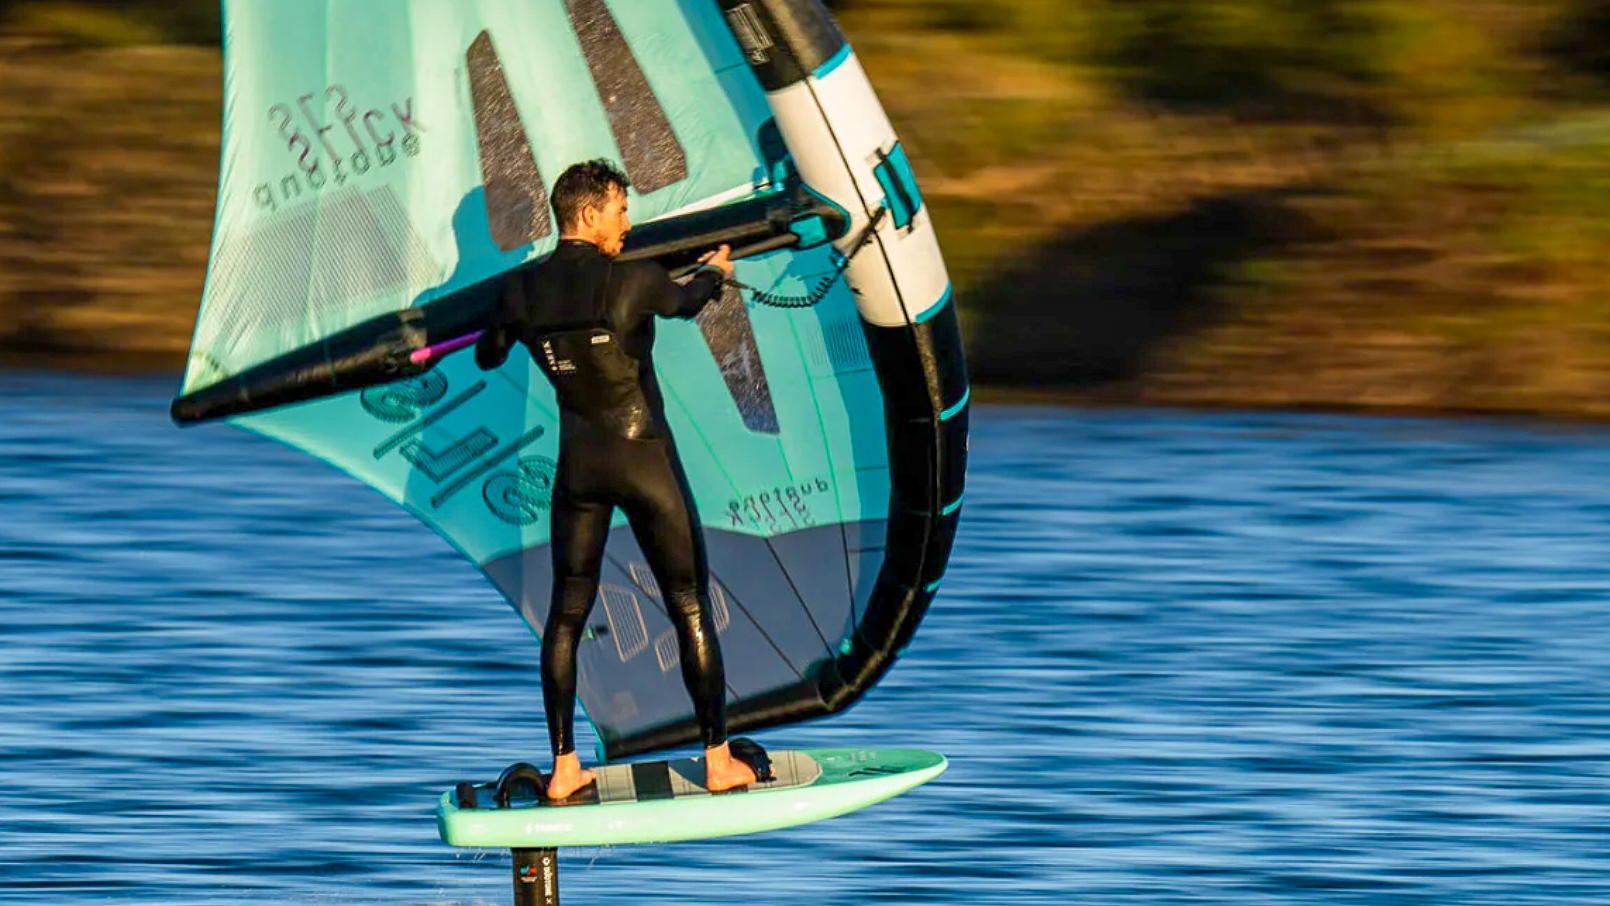 How to Wing Foil Upwind  Techniques for Mastering Upwind Riding